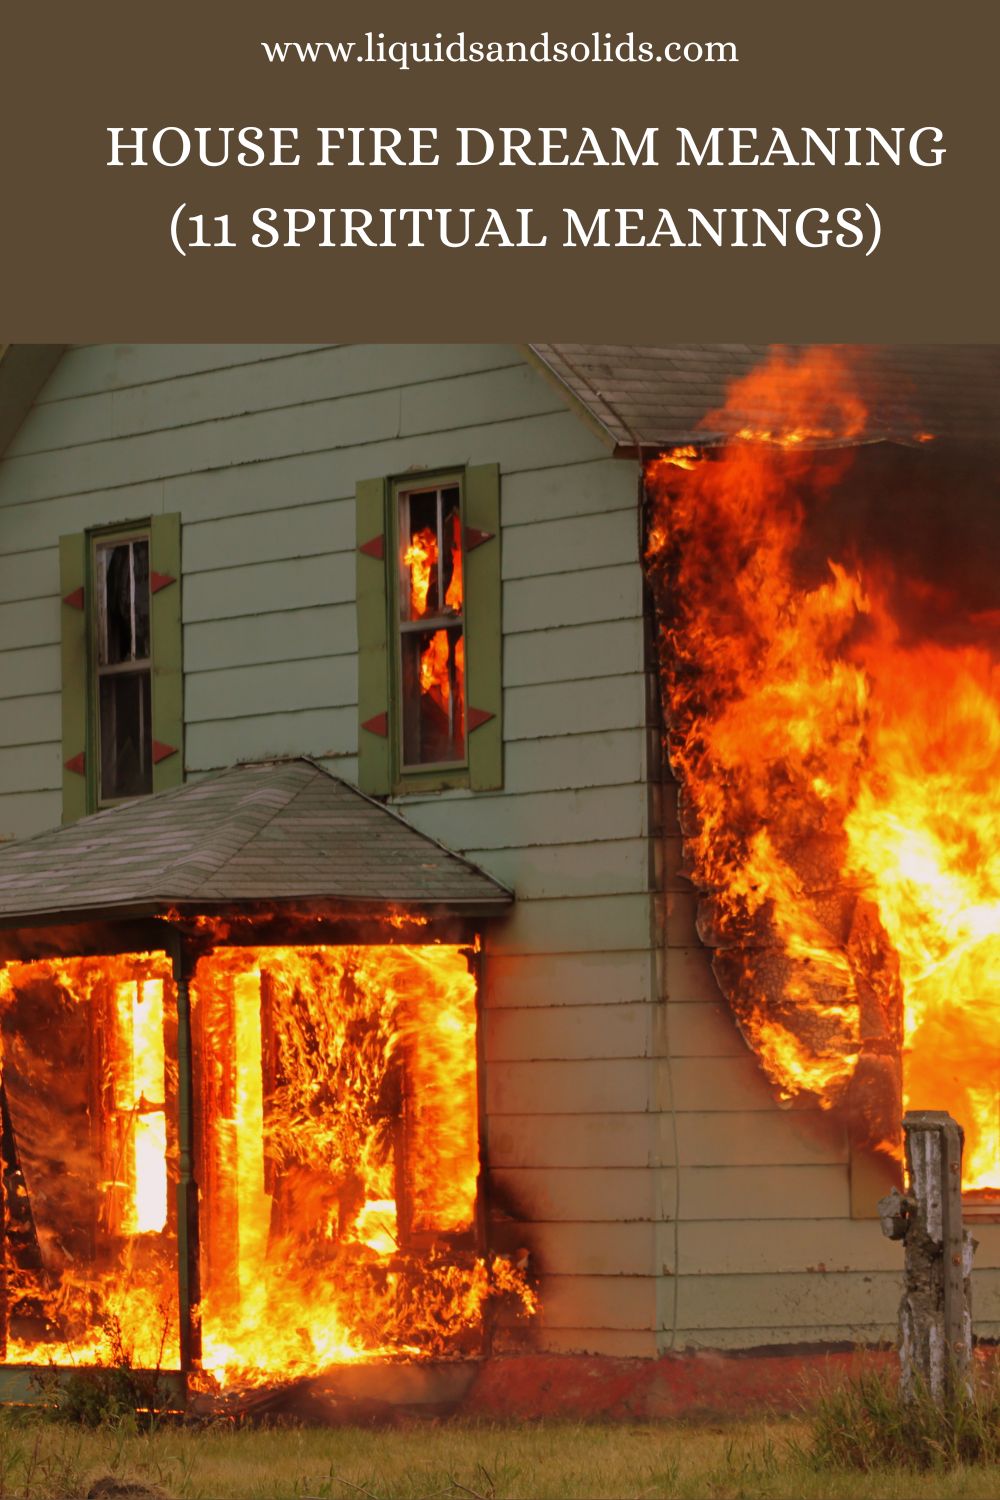 What Does A House Fire Dream Mean?